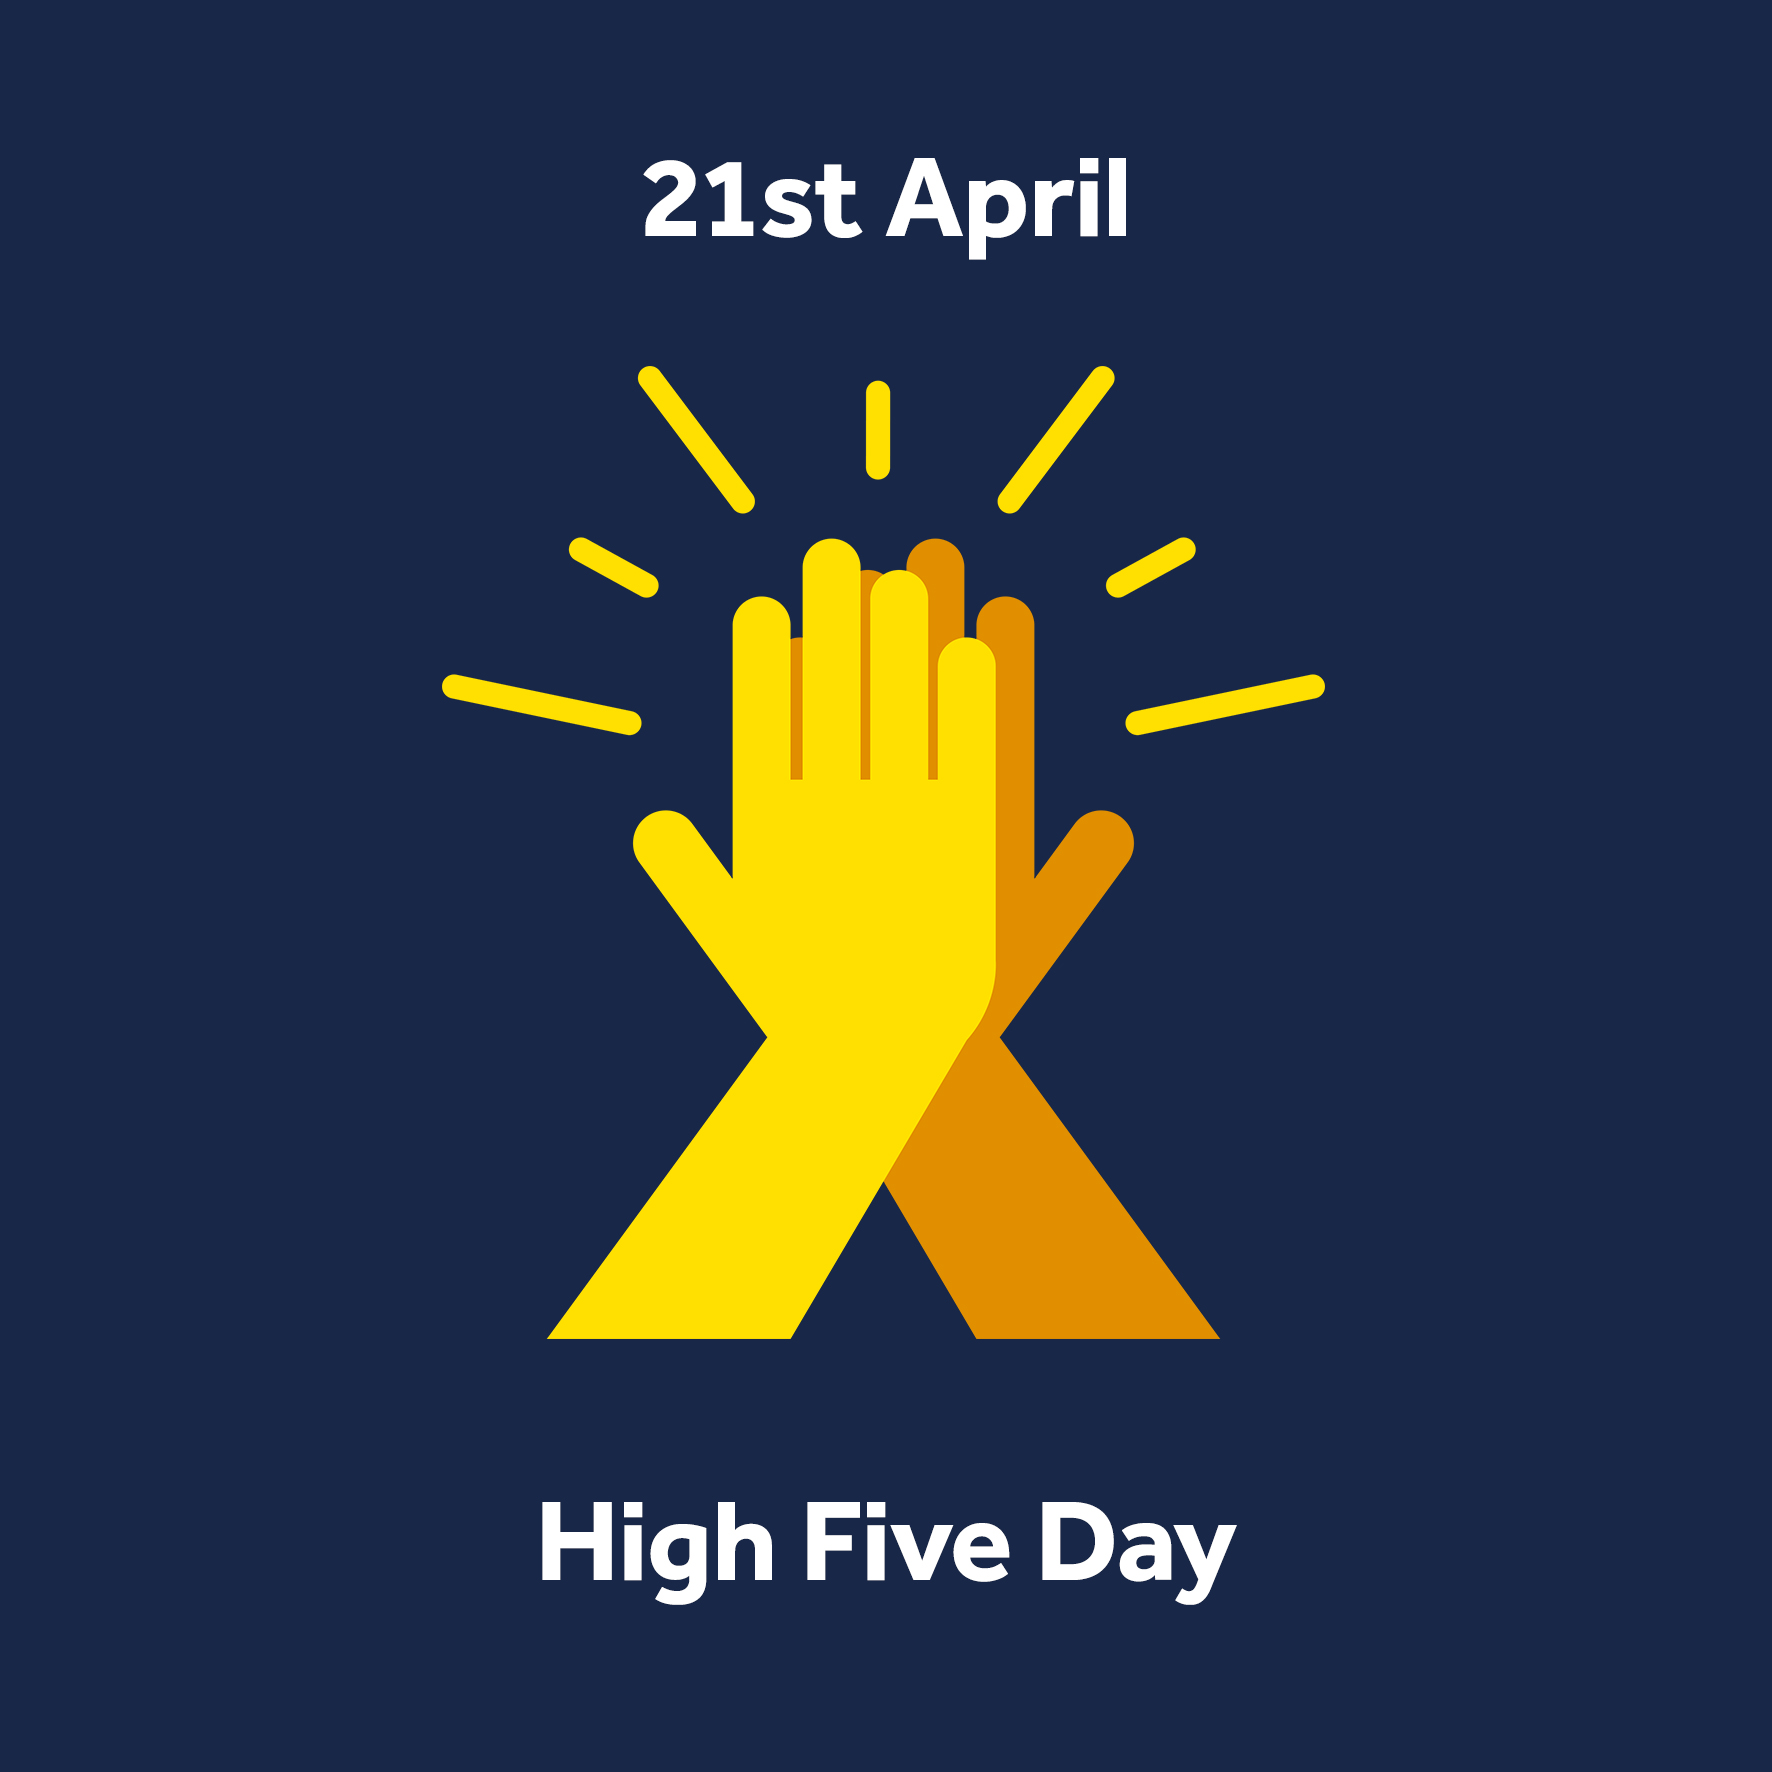 High Five Day